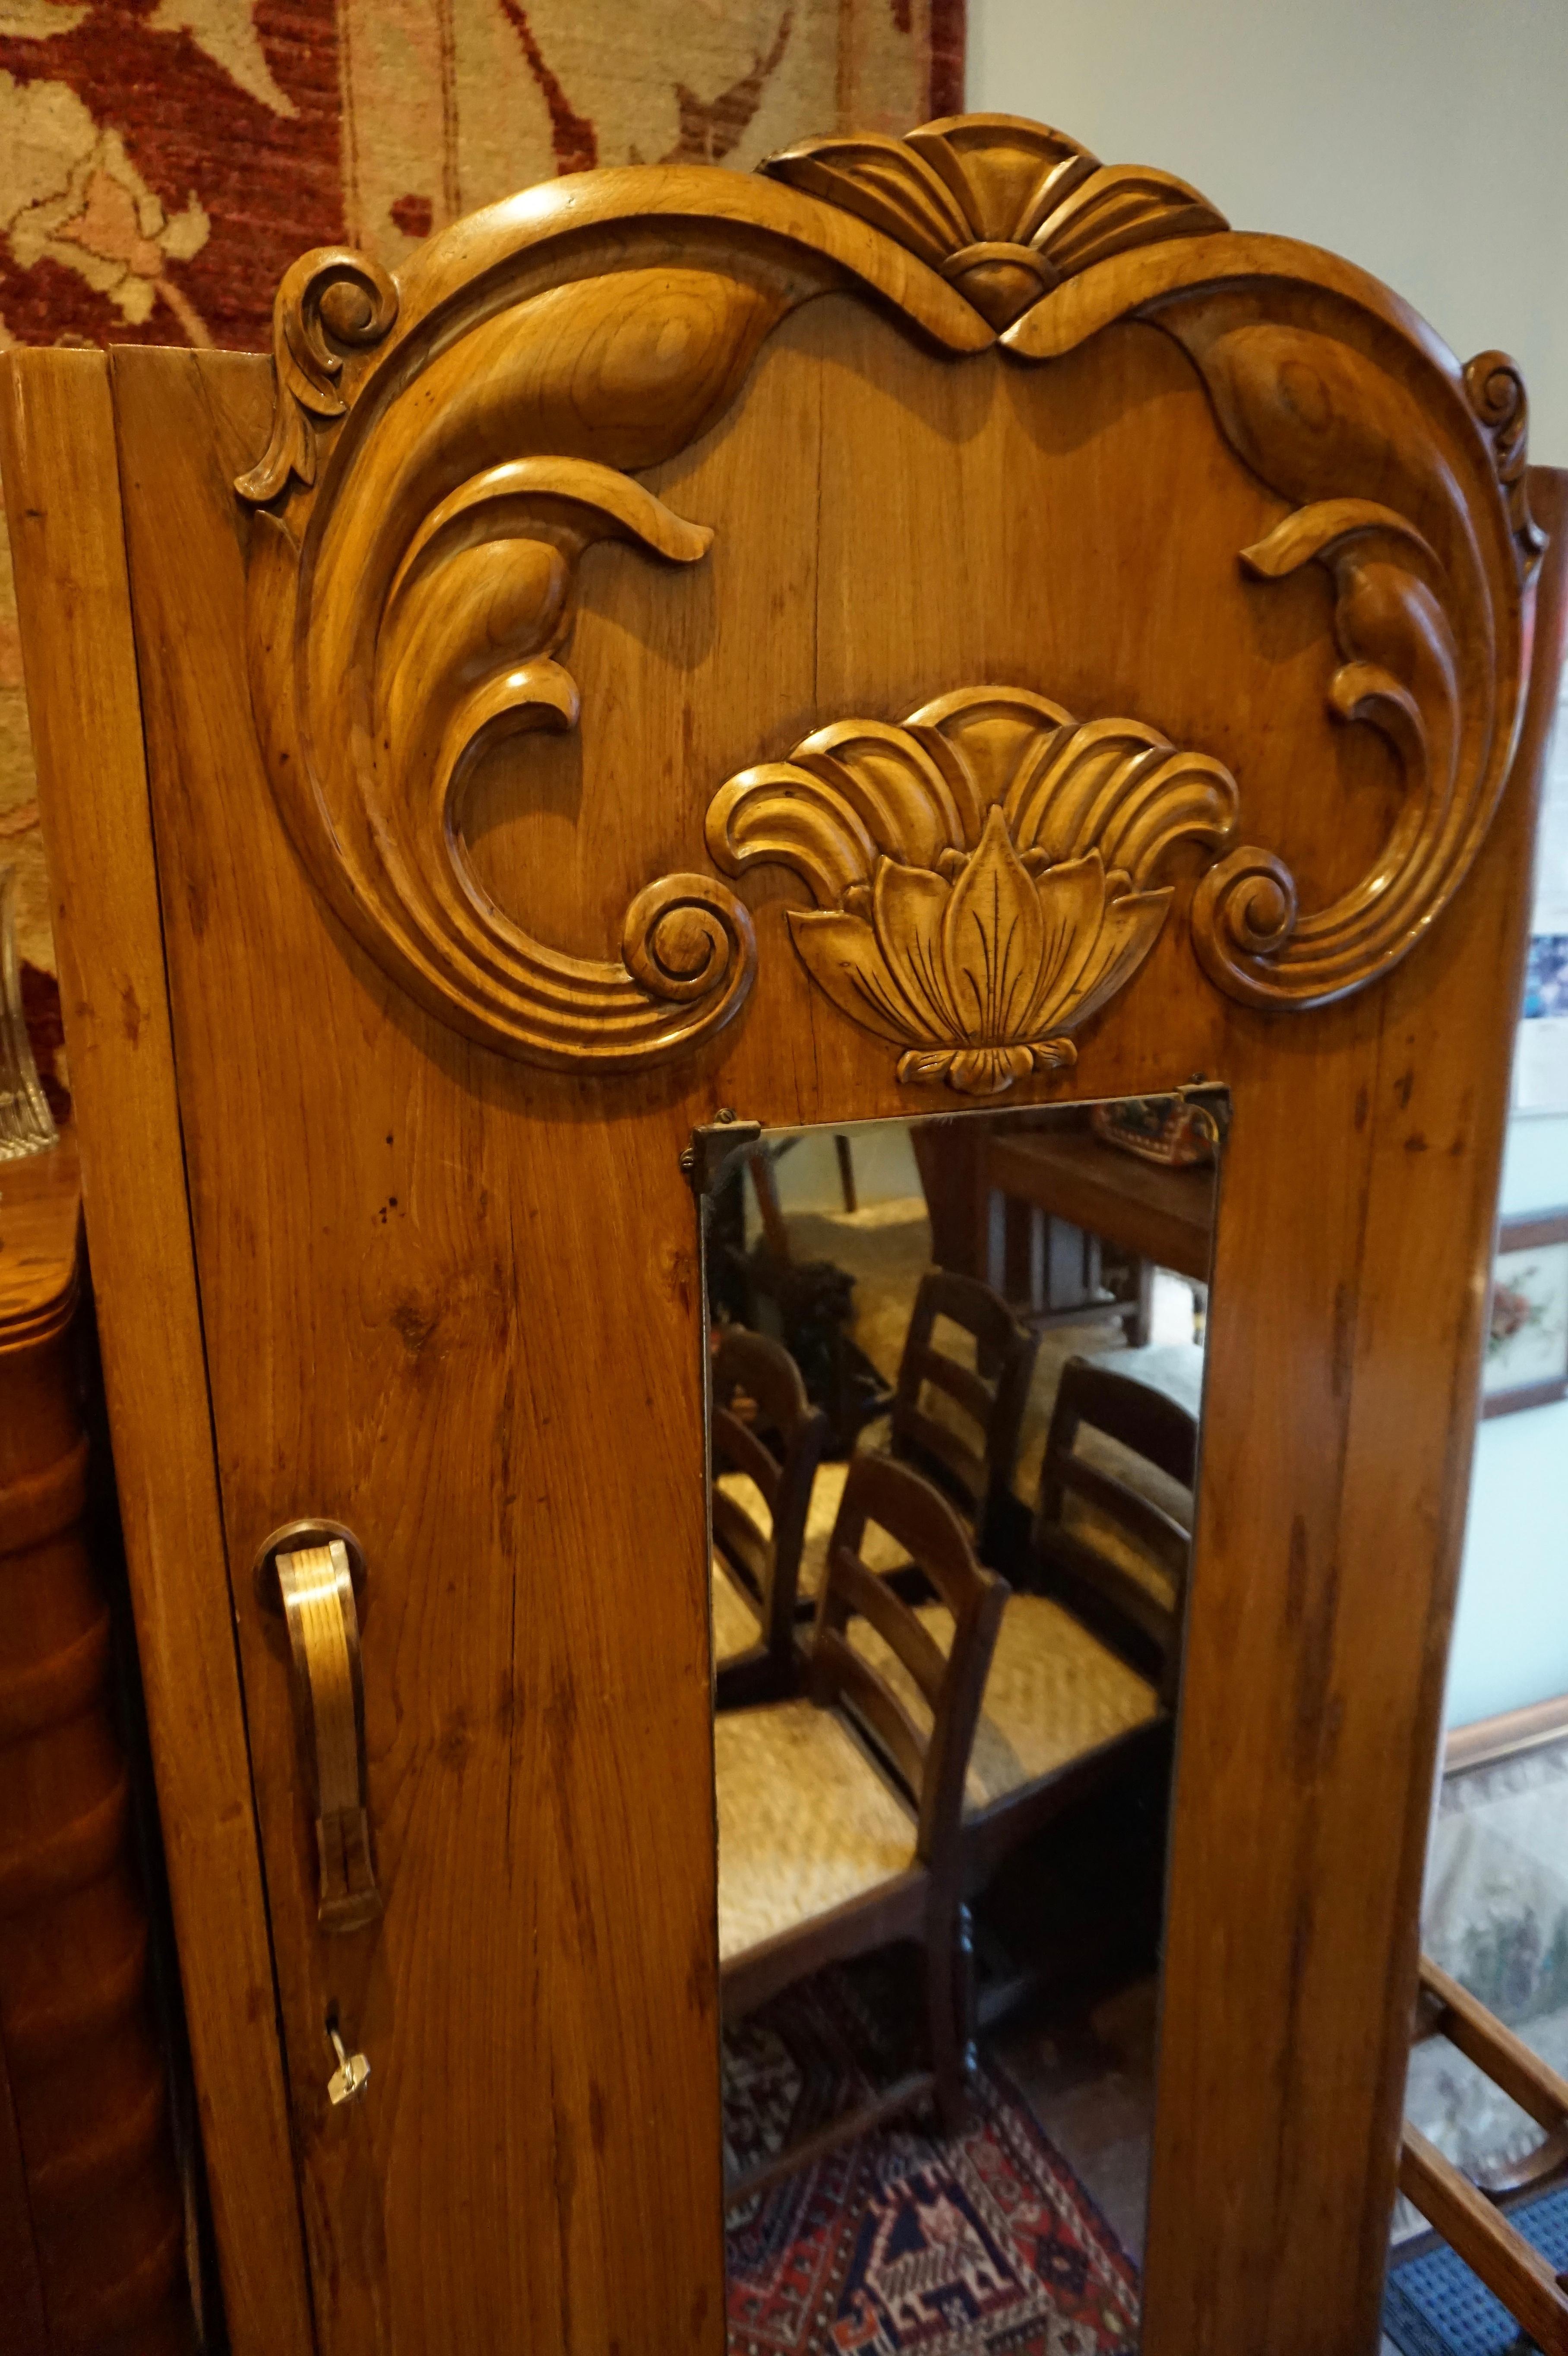 Art Deco Armoire constructed from solid teak with a hand carved facade and steamed edges. Beautiful flowing golden grains of teak wood. Single piano hinge supporting solid door frame. Inside it houses two drawers and a hanging rack. Raised on a